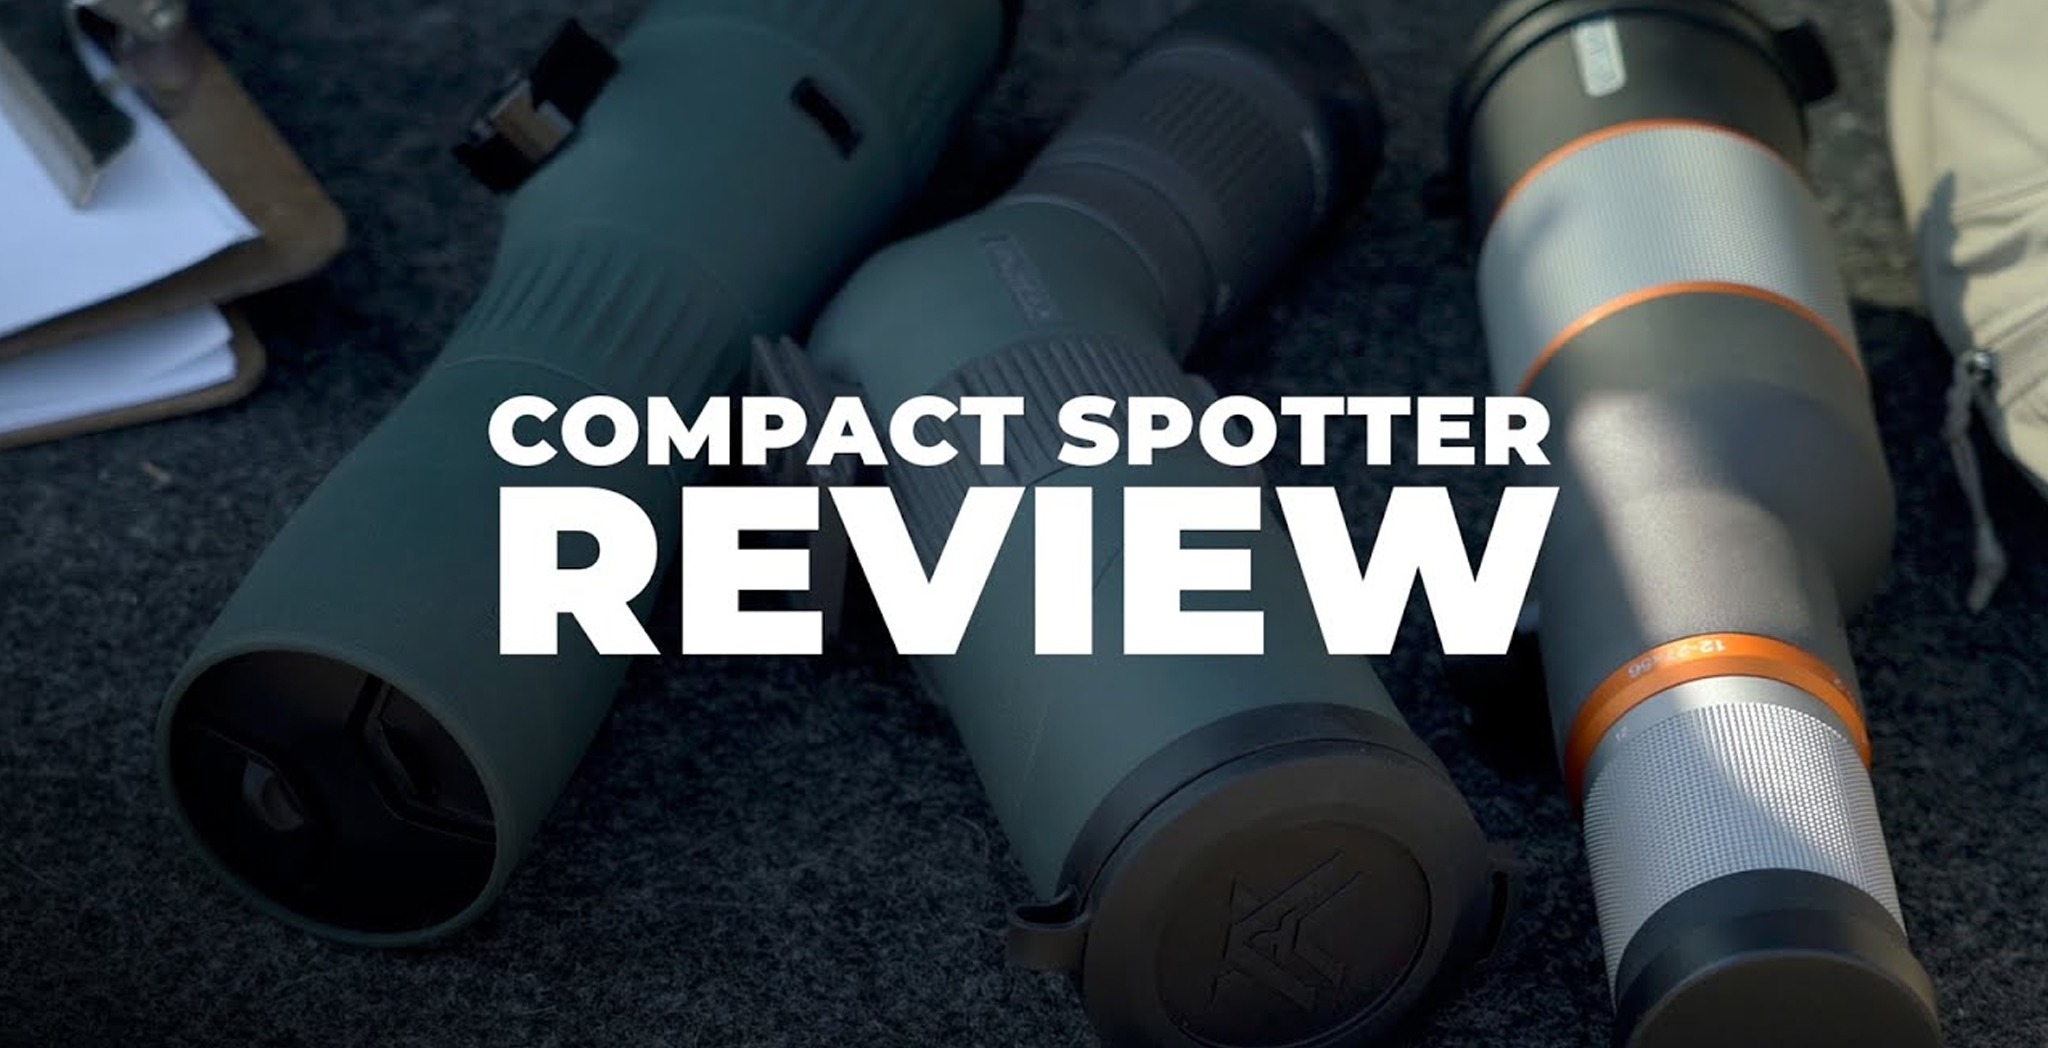 Compact Spotter Review